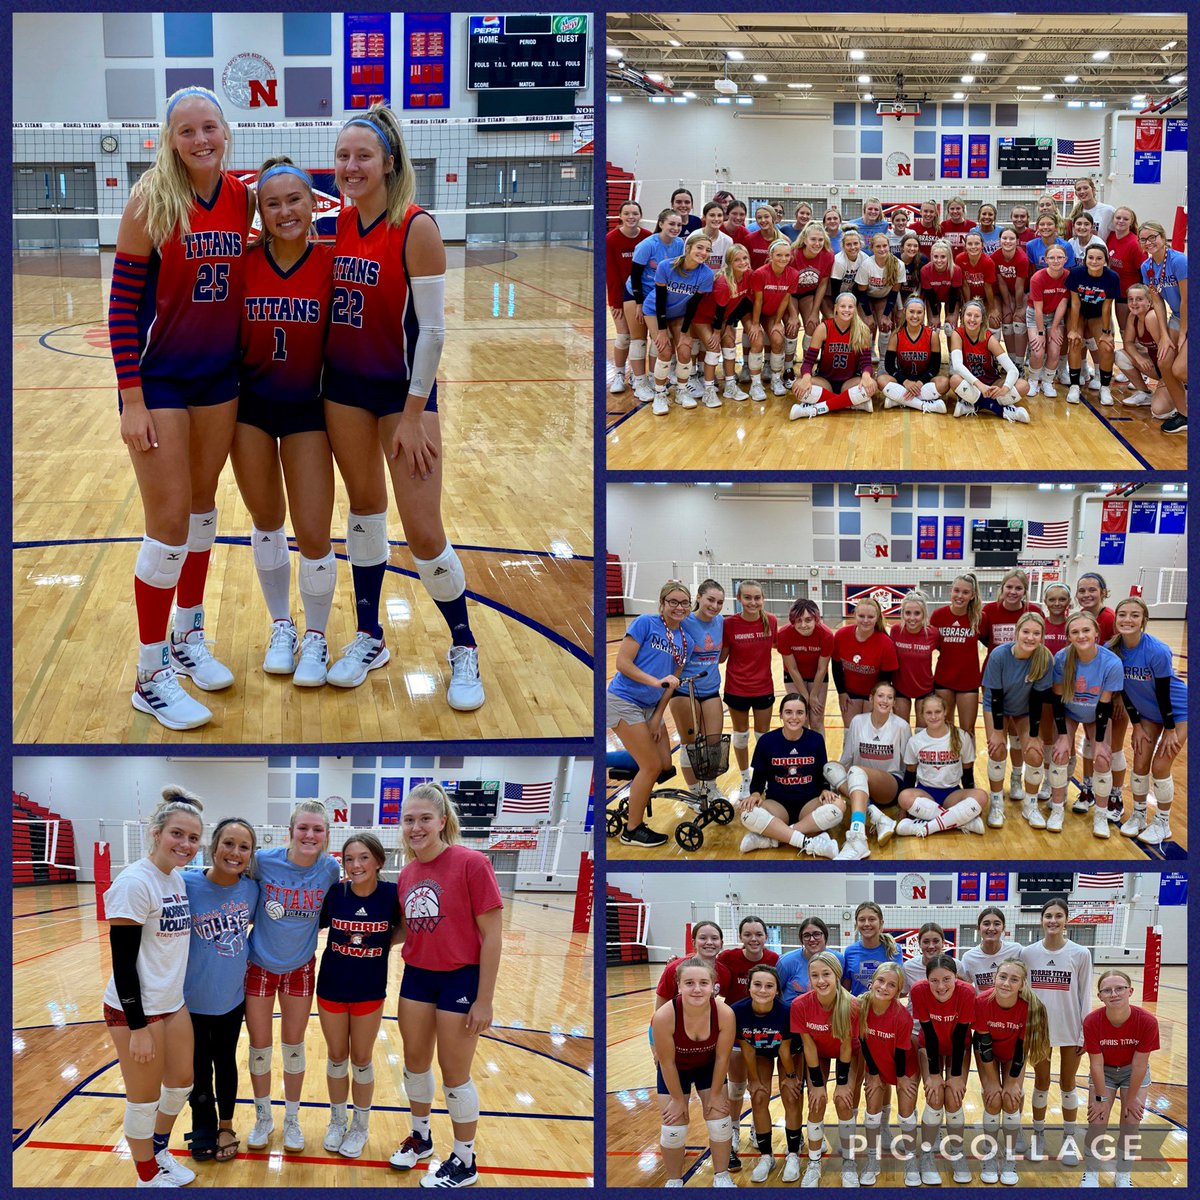 Friday Fun Day in the gym! 🔴⚪️🔵 theme. It’s been a great first week! @boesiger_maisie @ellawaters05 @sydney_jelinek #seniorleaders